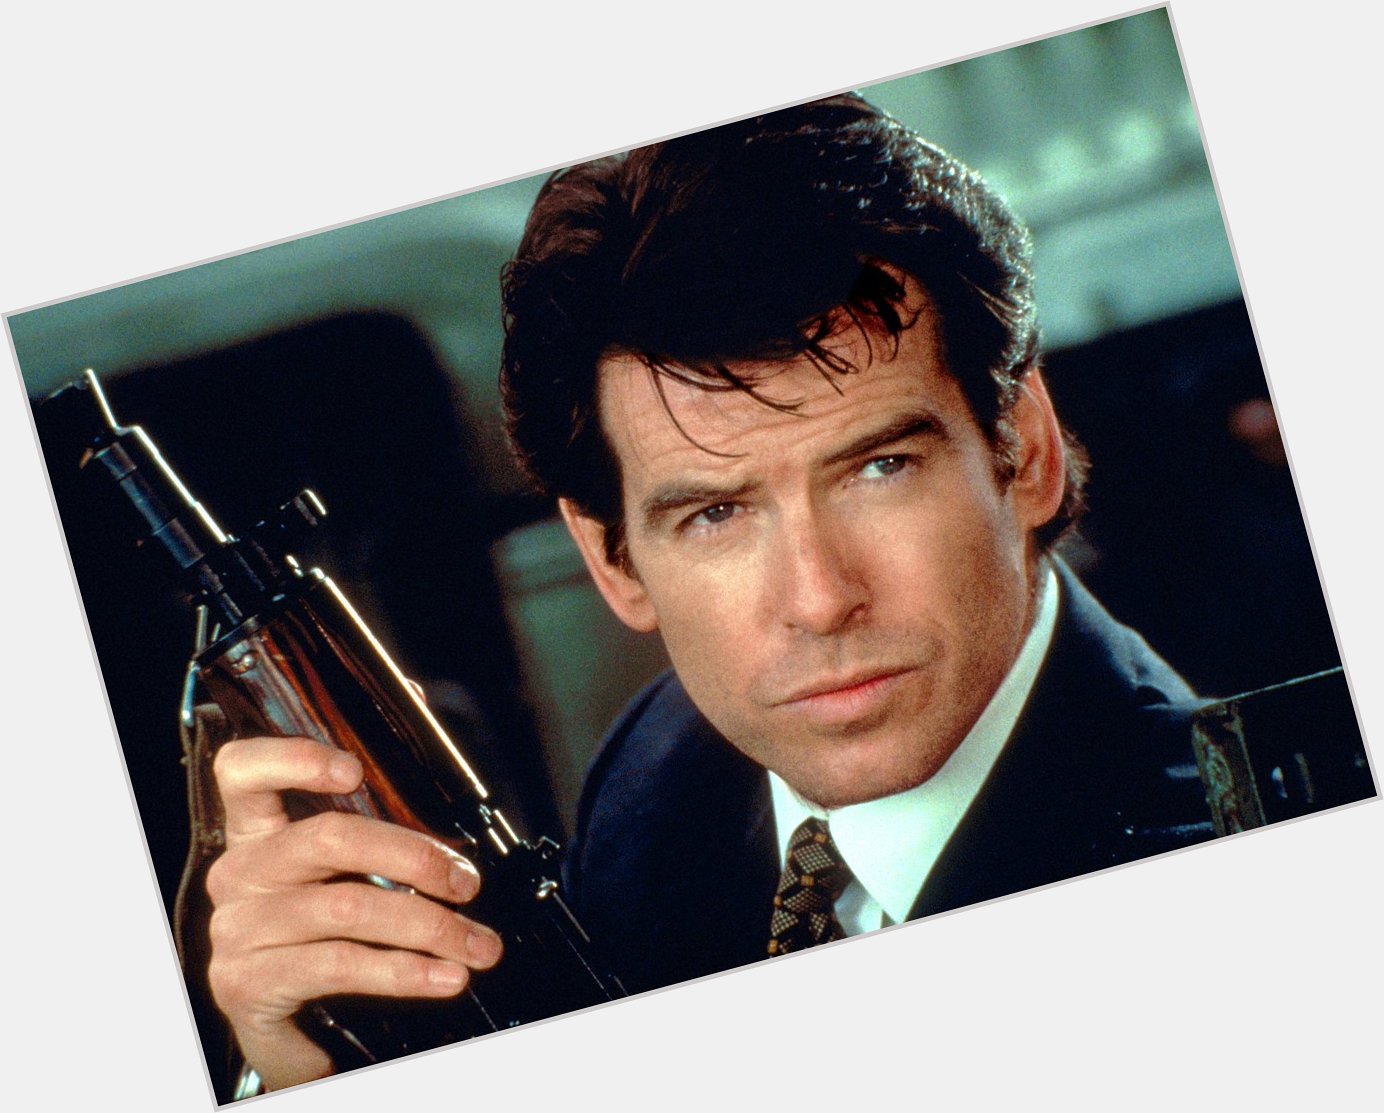 Happy birthday and shout out to my favorite James Bond, Pierce Brosnan.   